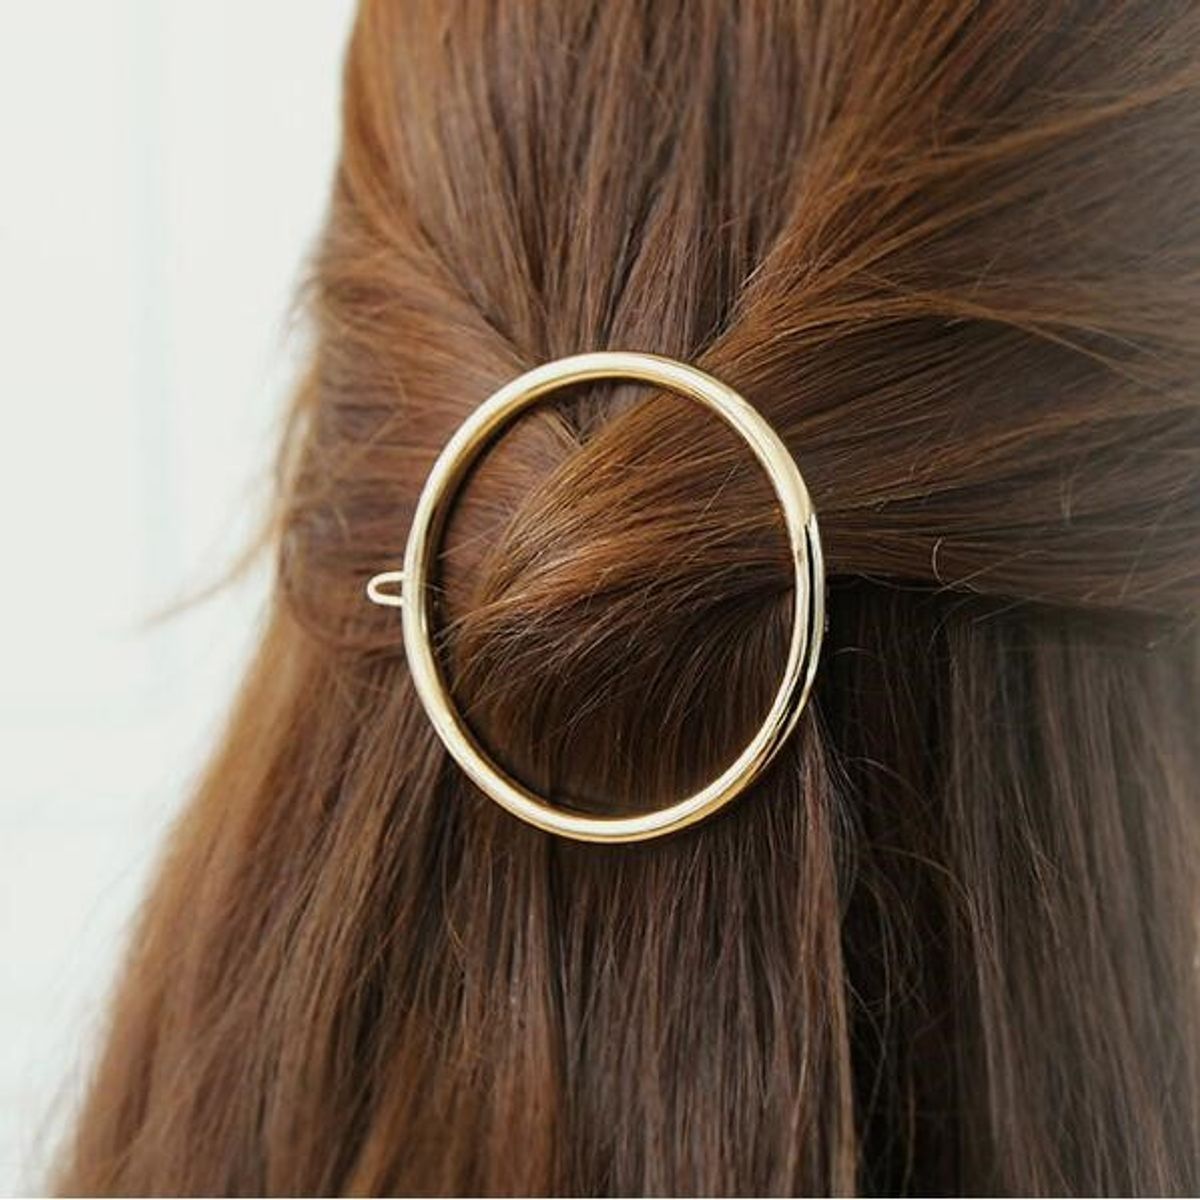 OOMPH Jewellery Gold Tone Delicate Fashion Hair Clips Hairpin Hair Clamps  In Round Geometric Shape: Buy OOMPH Jewellery Gold Tone Delicate Fashion Hair  Clips Hairpin Hair Clamps In Round Geometric Shape Online